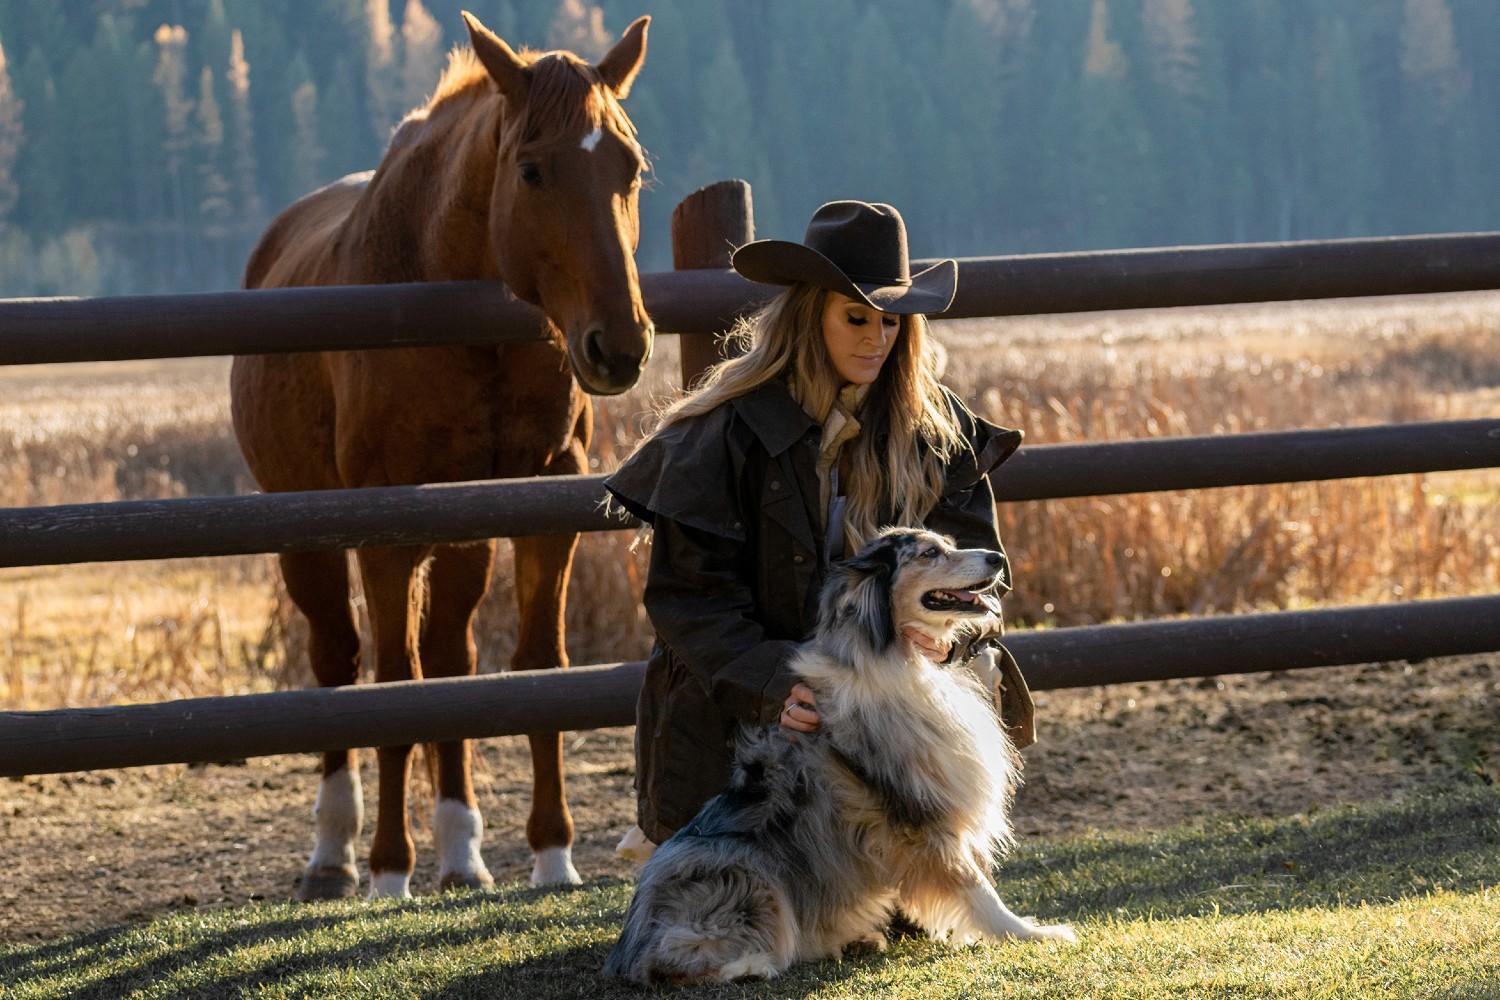 Yee-haw! Gallop With Fido at a Pet-Friendly Dude Ranch